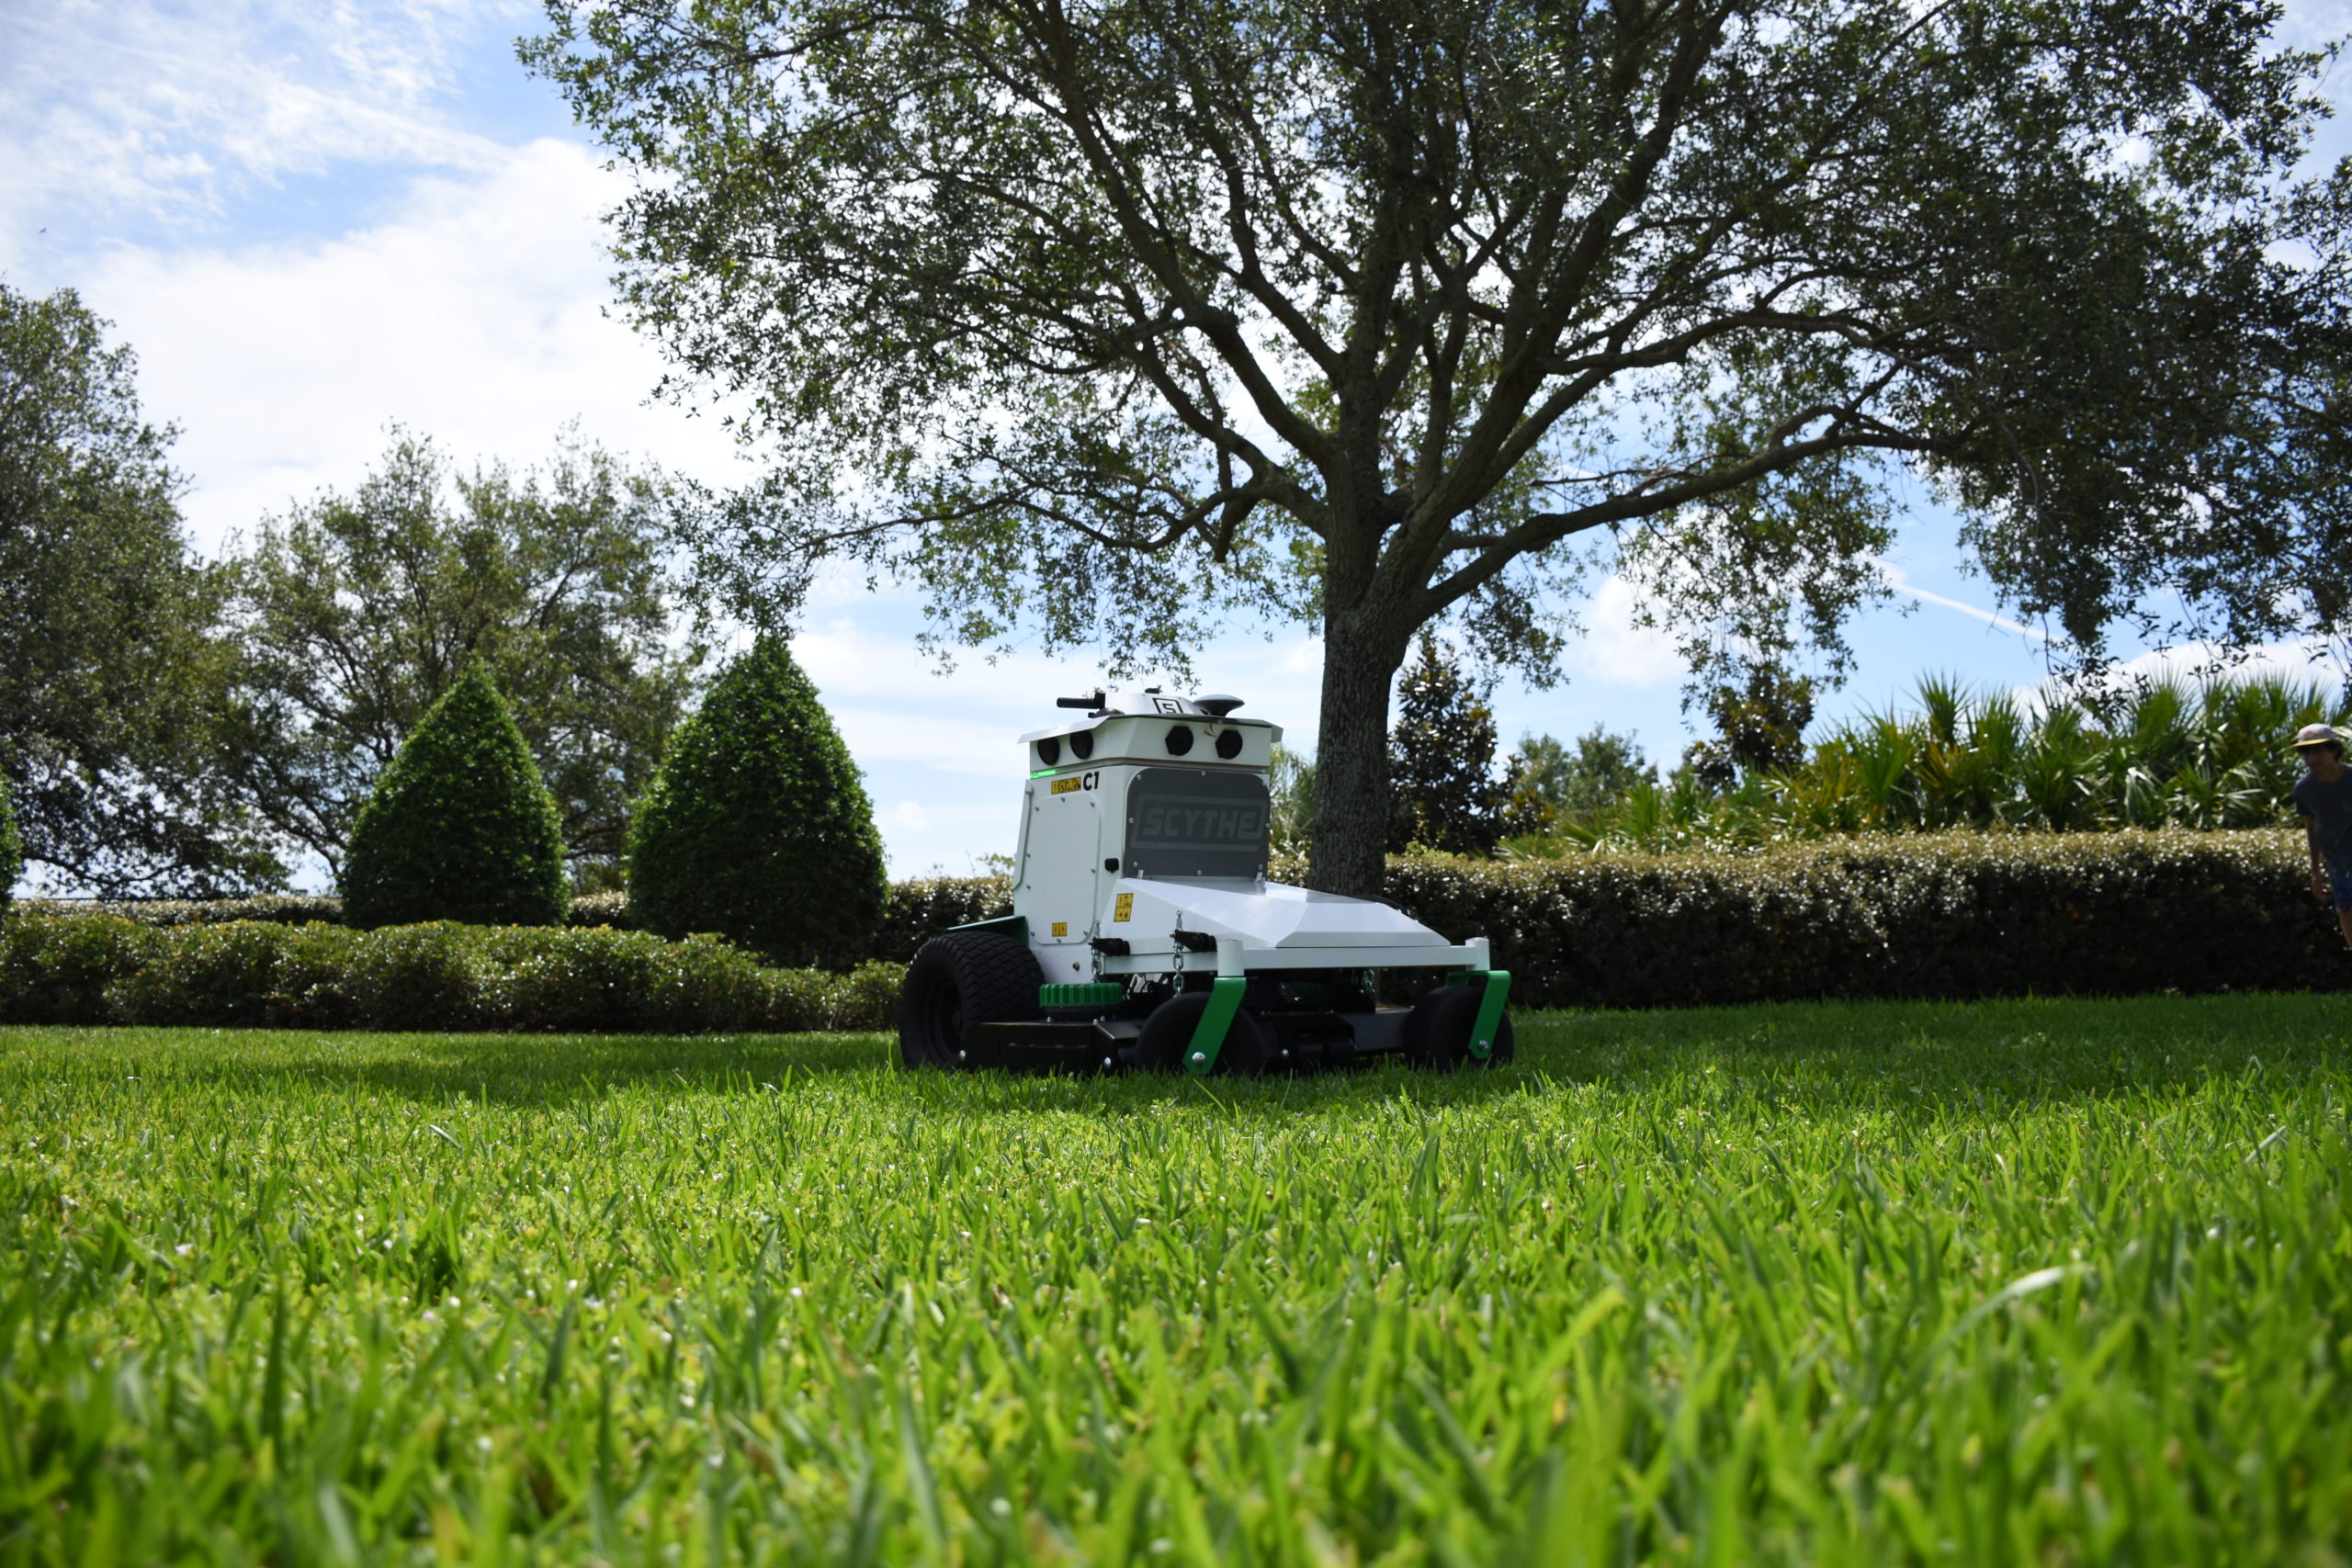 Meet the Robot Landscapers of the Future: A Q&A with Billy Otteman of Scythe Robotics